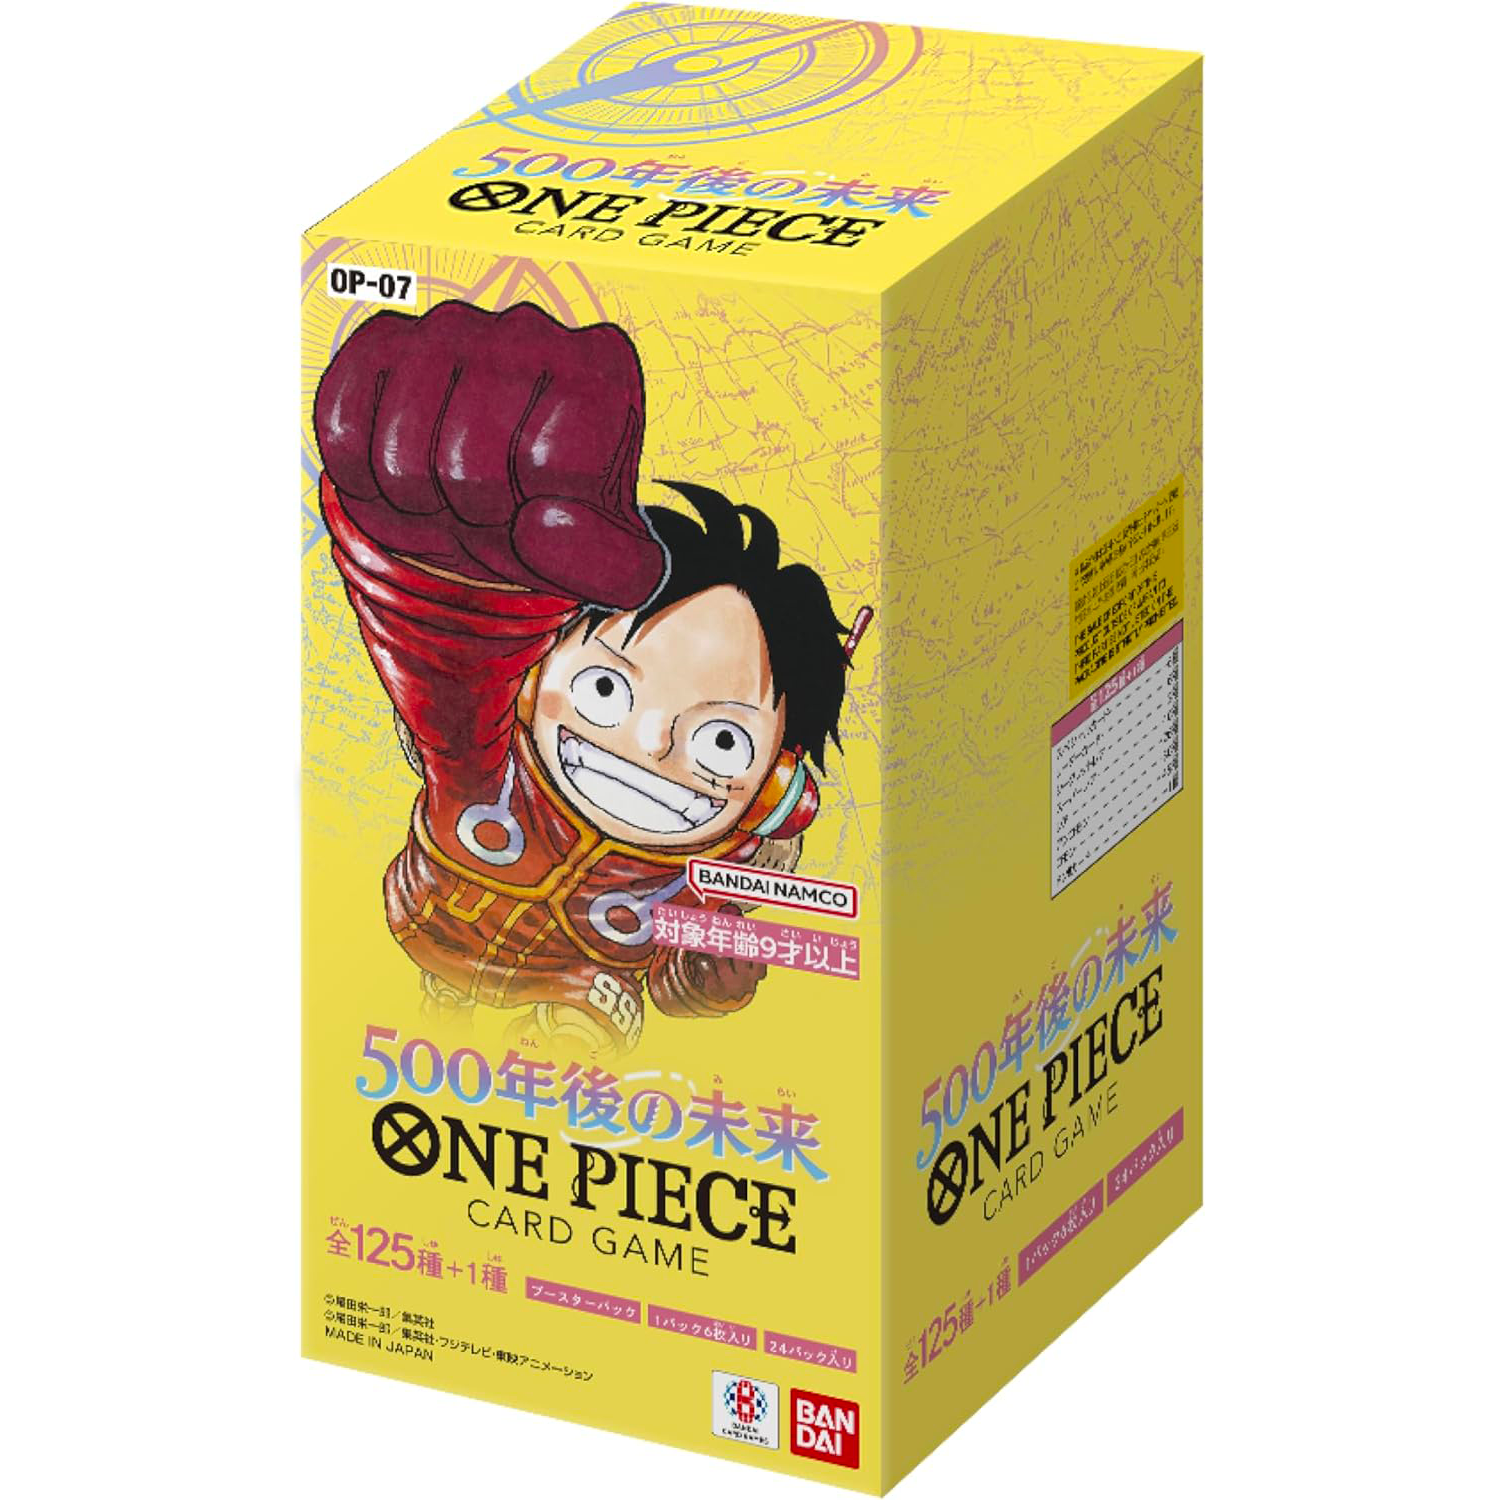 OP-07] ONE PIECE CARD GAME Booster Pack ｢500 Years in the Future｣ Box